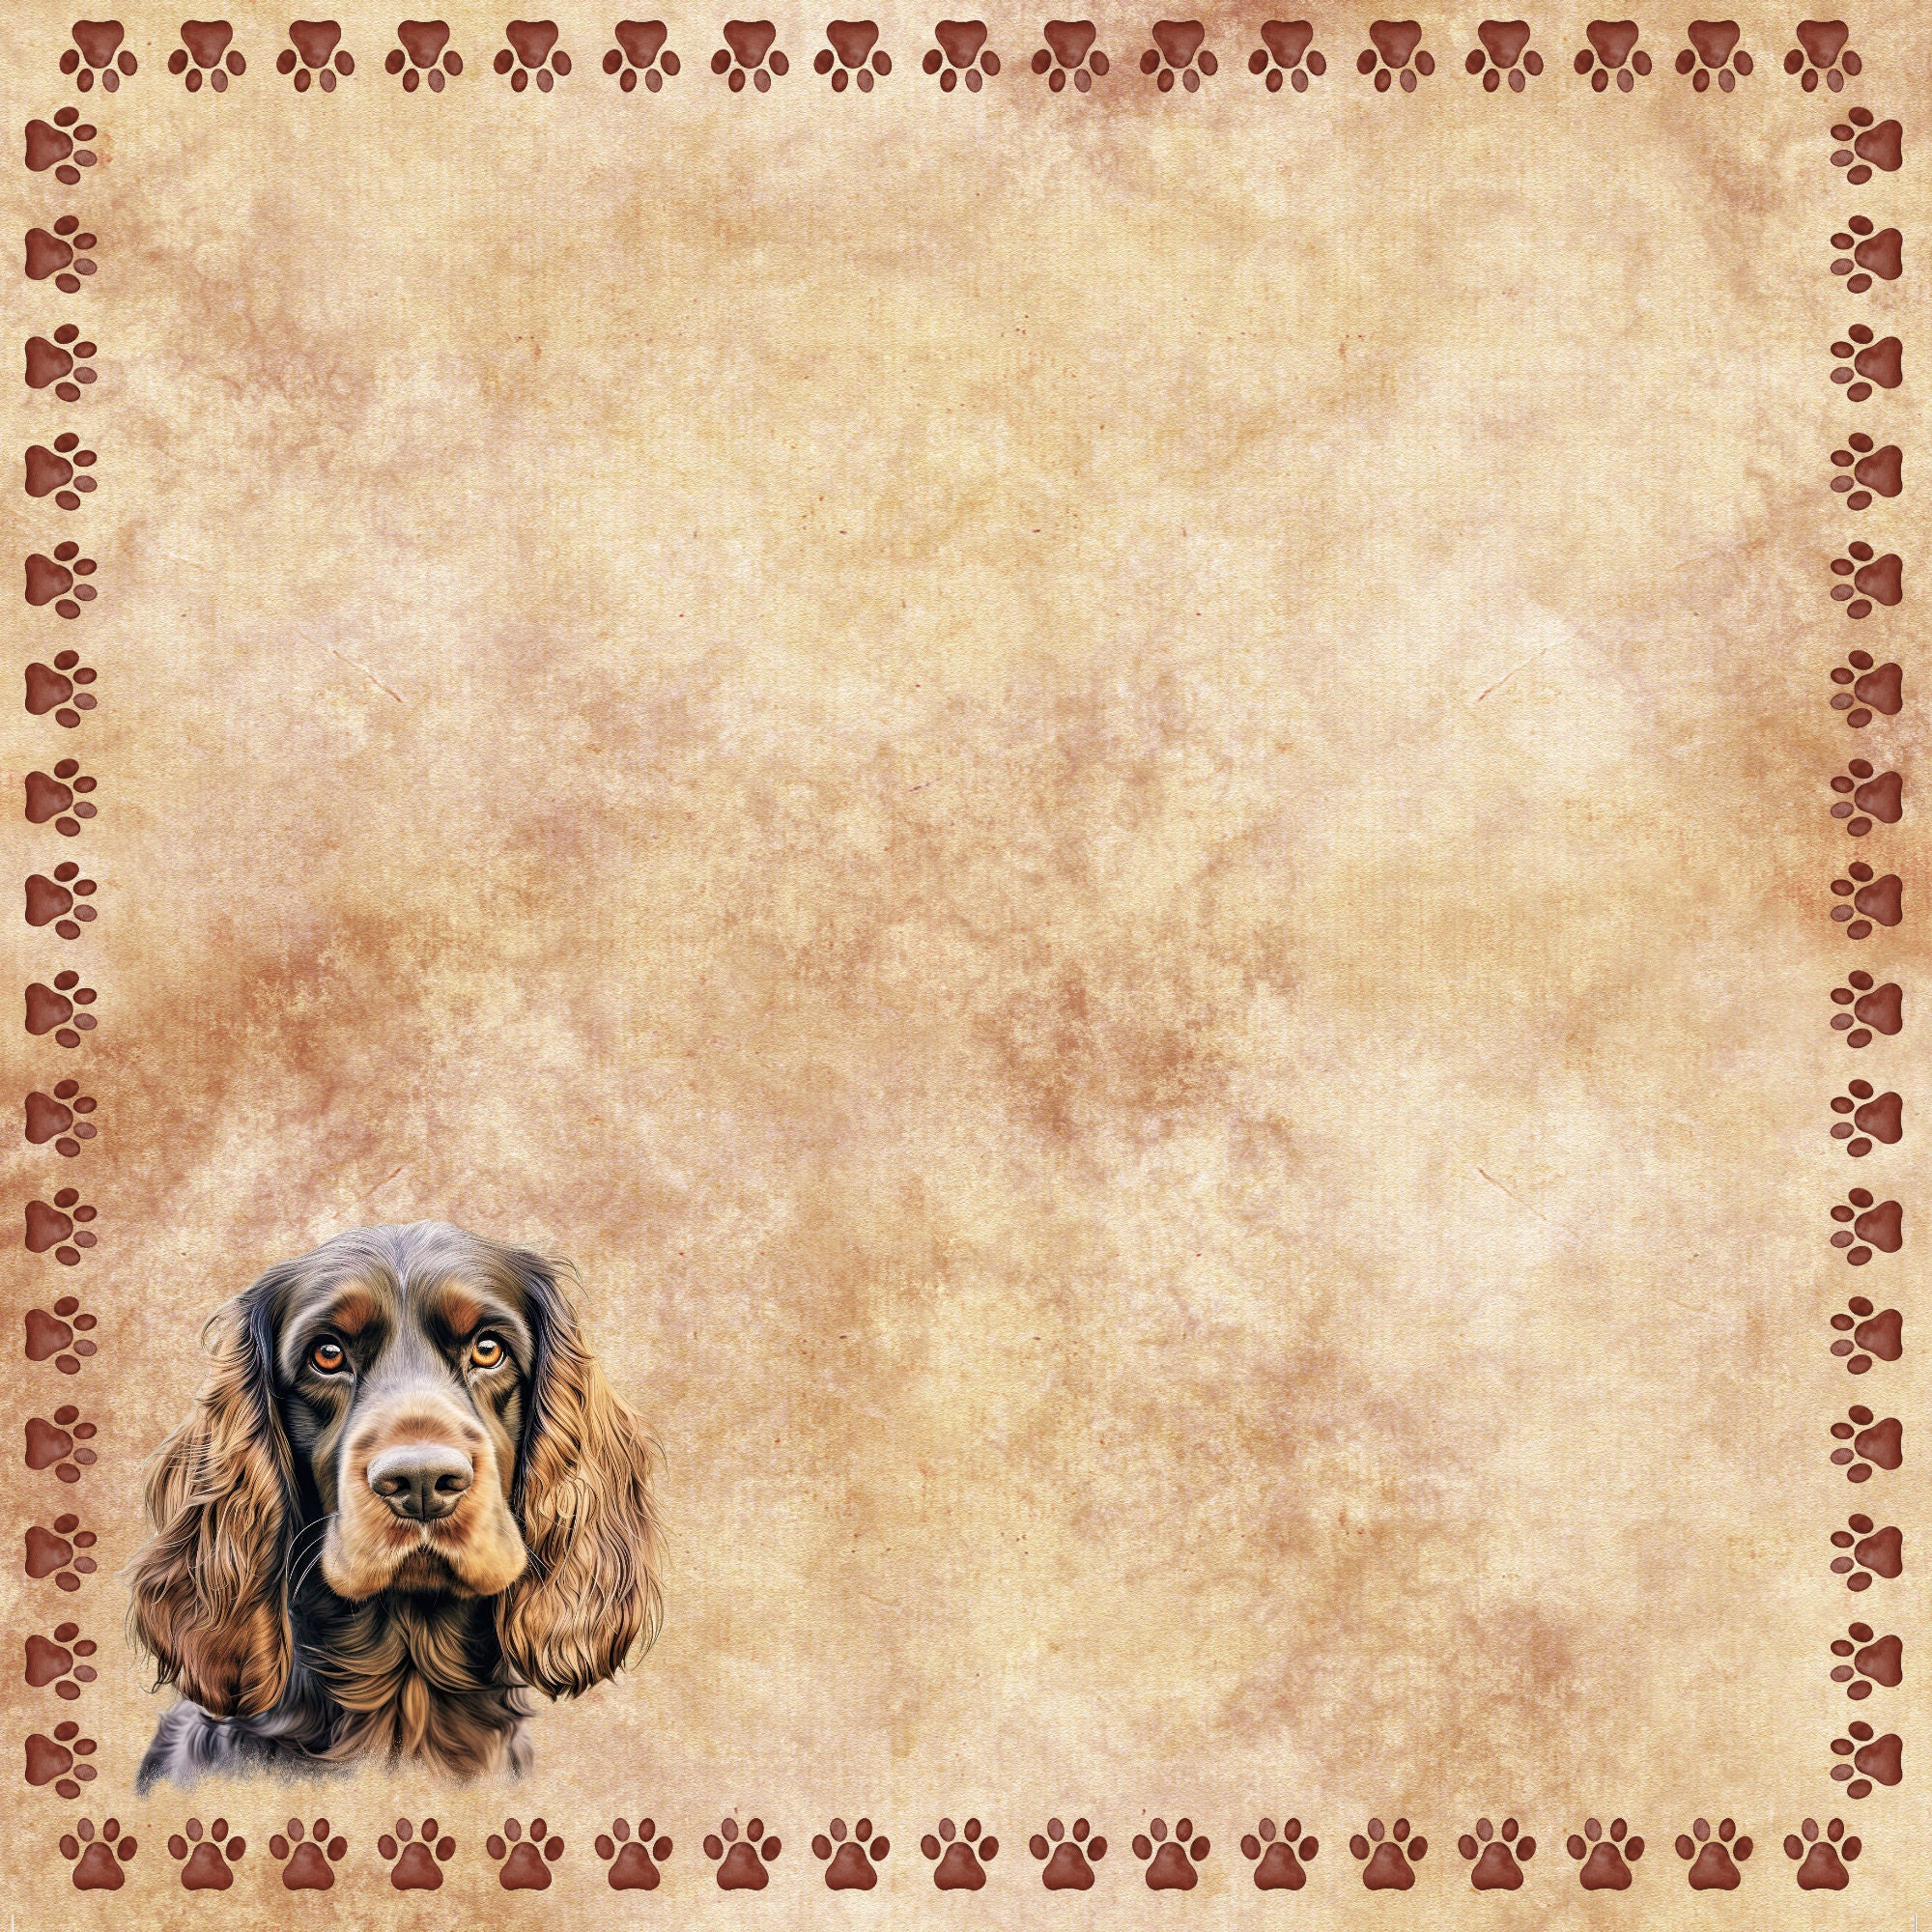 Dog Breeds Collection Cocker Spaniel 12 x 12 Double-Sided Scrapbook Paper by SSC Designs